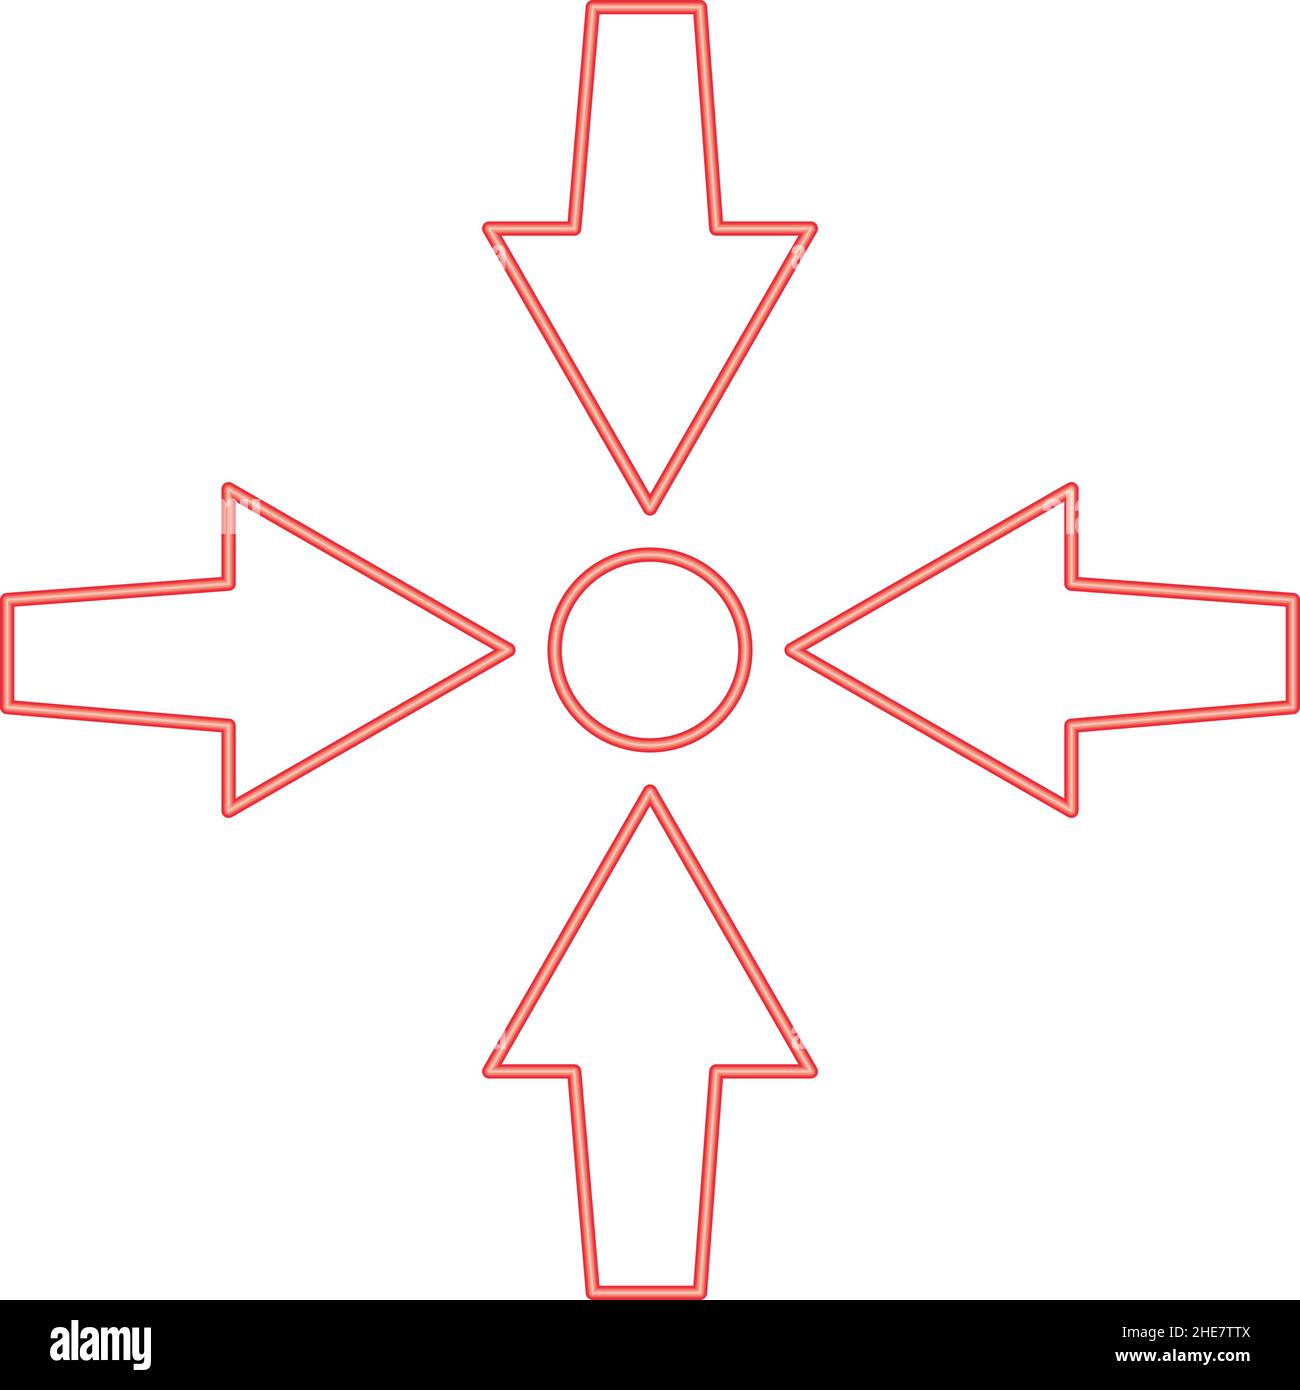 Neon four arrows point show to dot red color vector illustration image flat style light Stock Vector